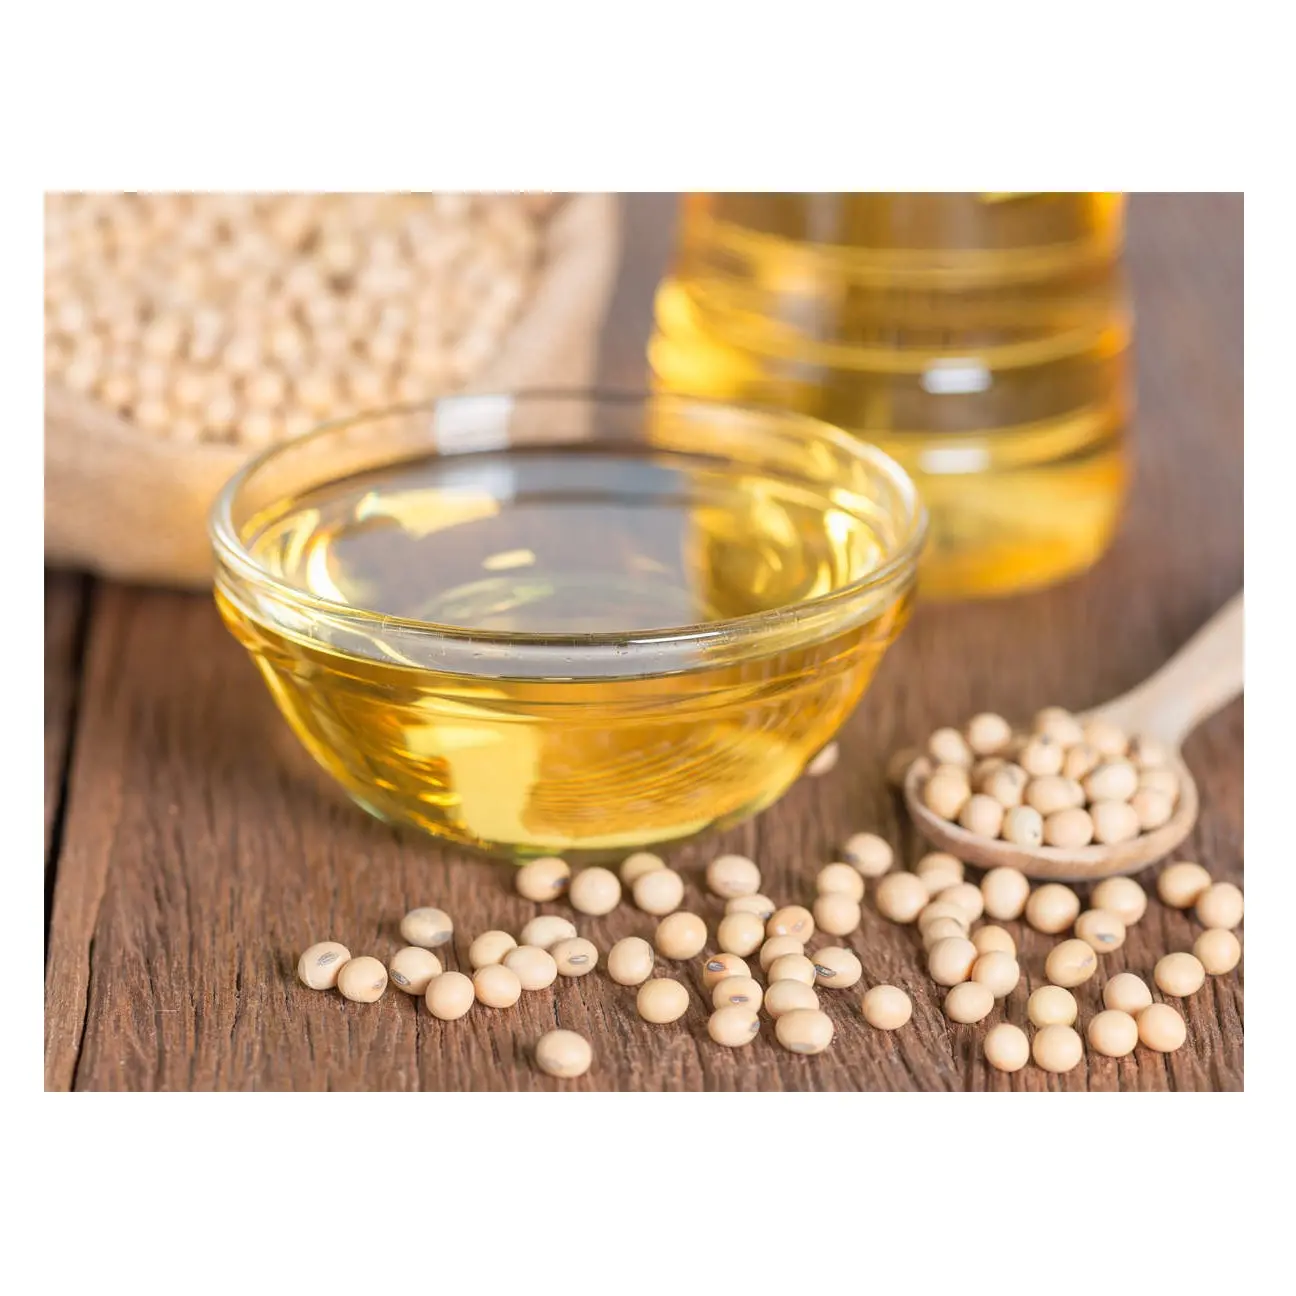 Bulk Stock Available Of Soya oil for cooking/Refined Soyabean Oil At Wholesale Prices